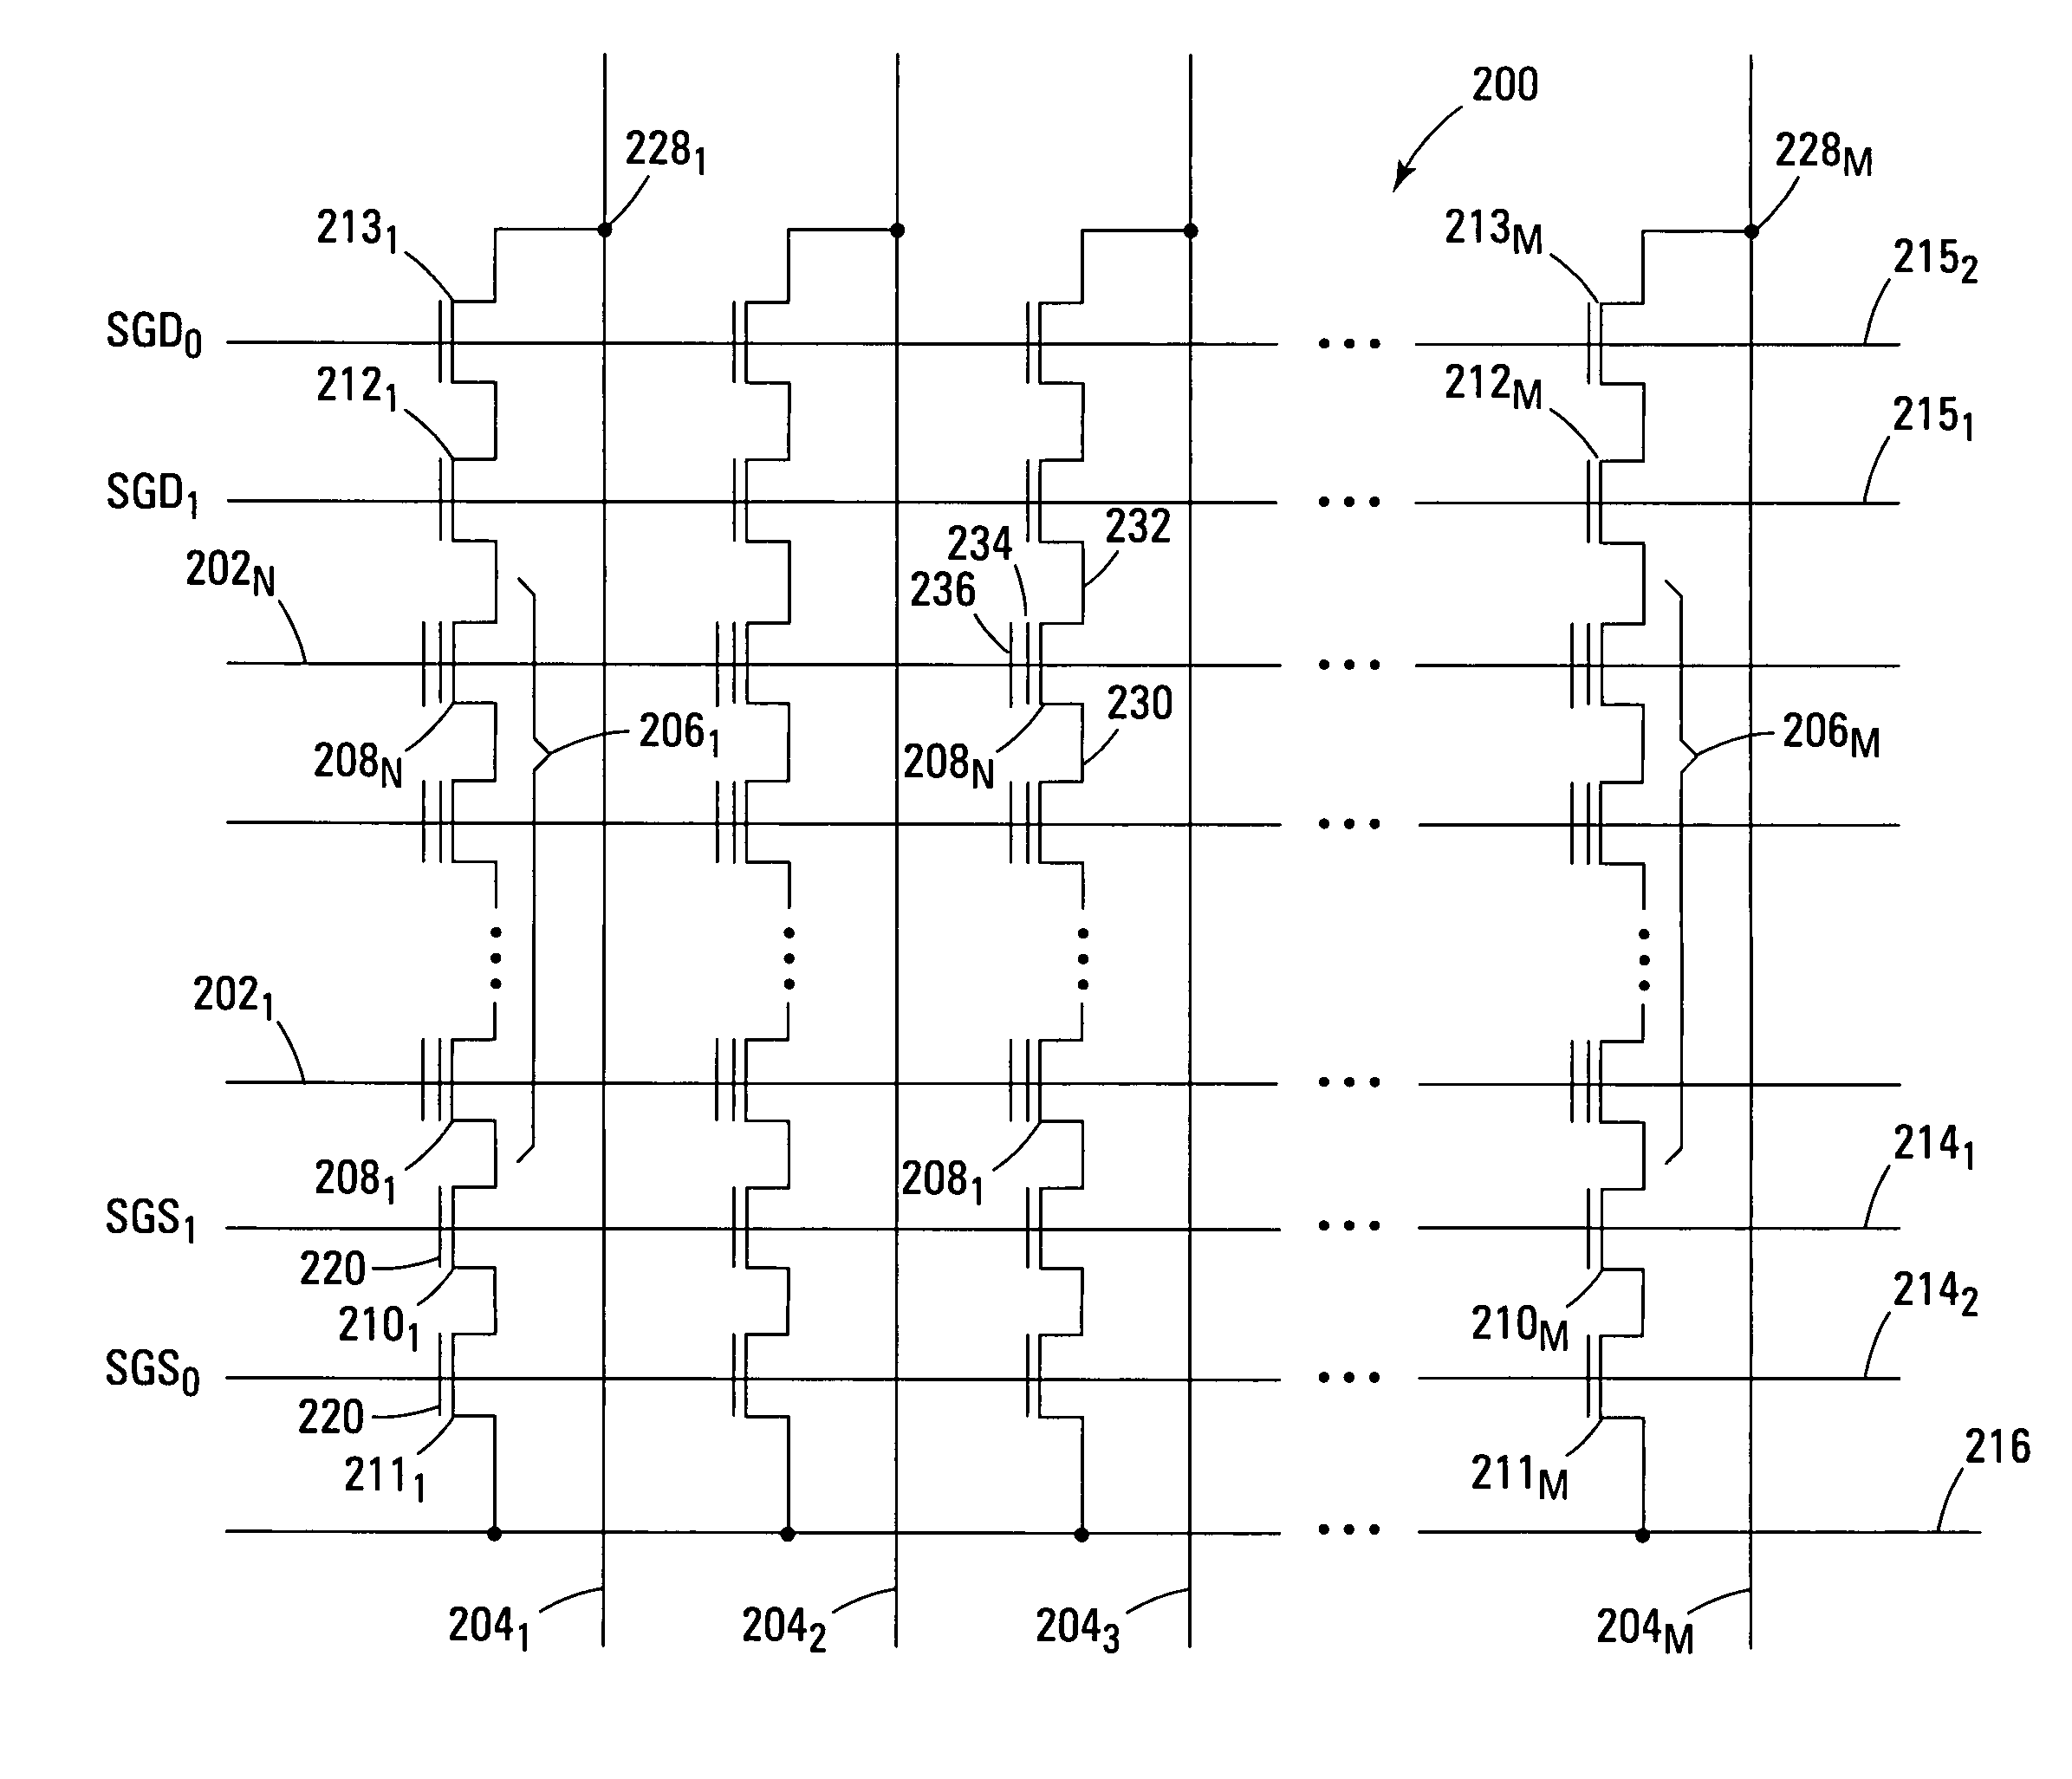 Operation of multiple select gate architecture